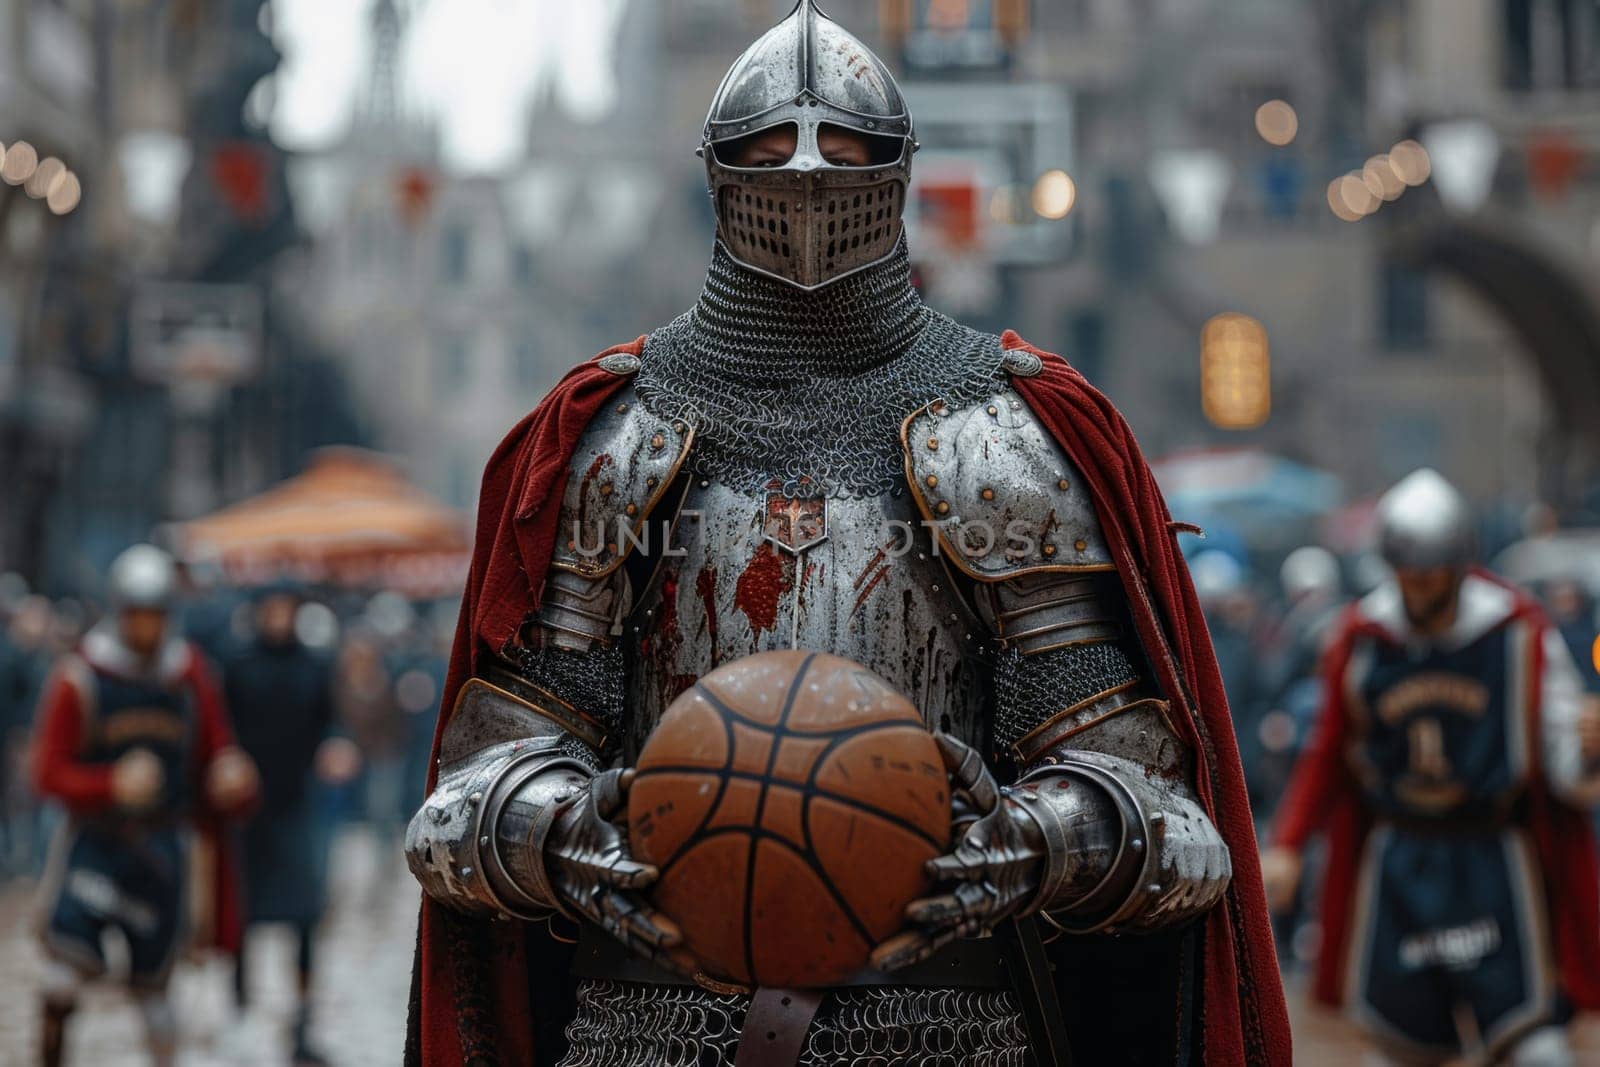 A medieval knight basketball player stands with a basketball before a game against a street backdrop.